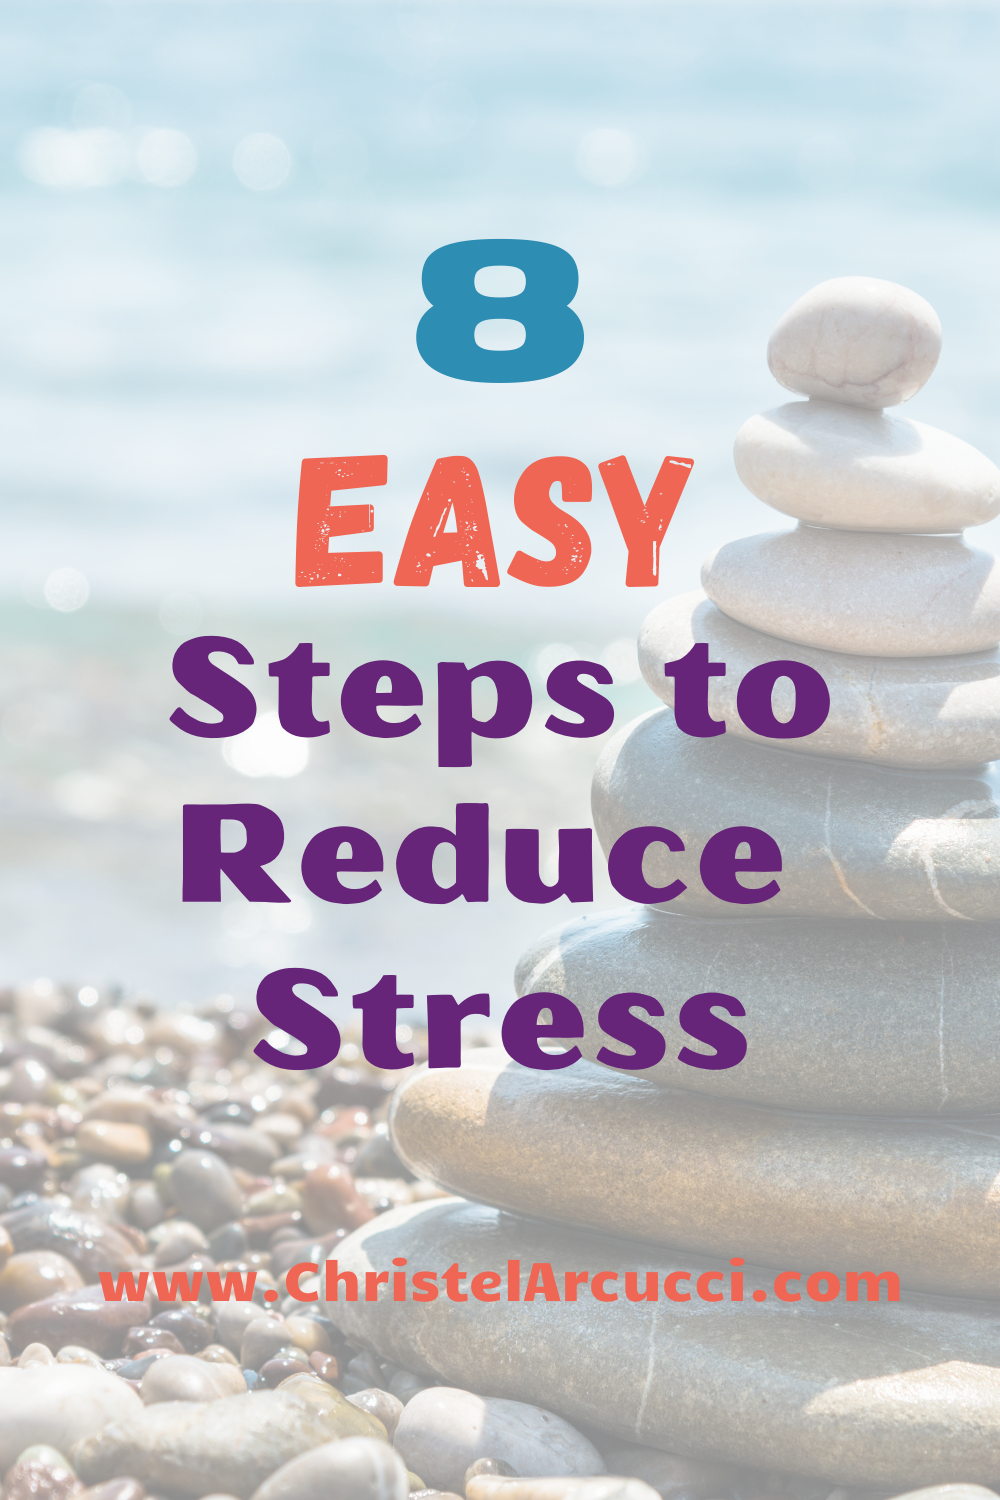 Mindfulness Practice to Reduce Stress